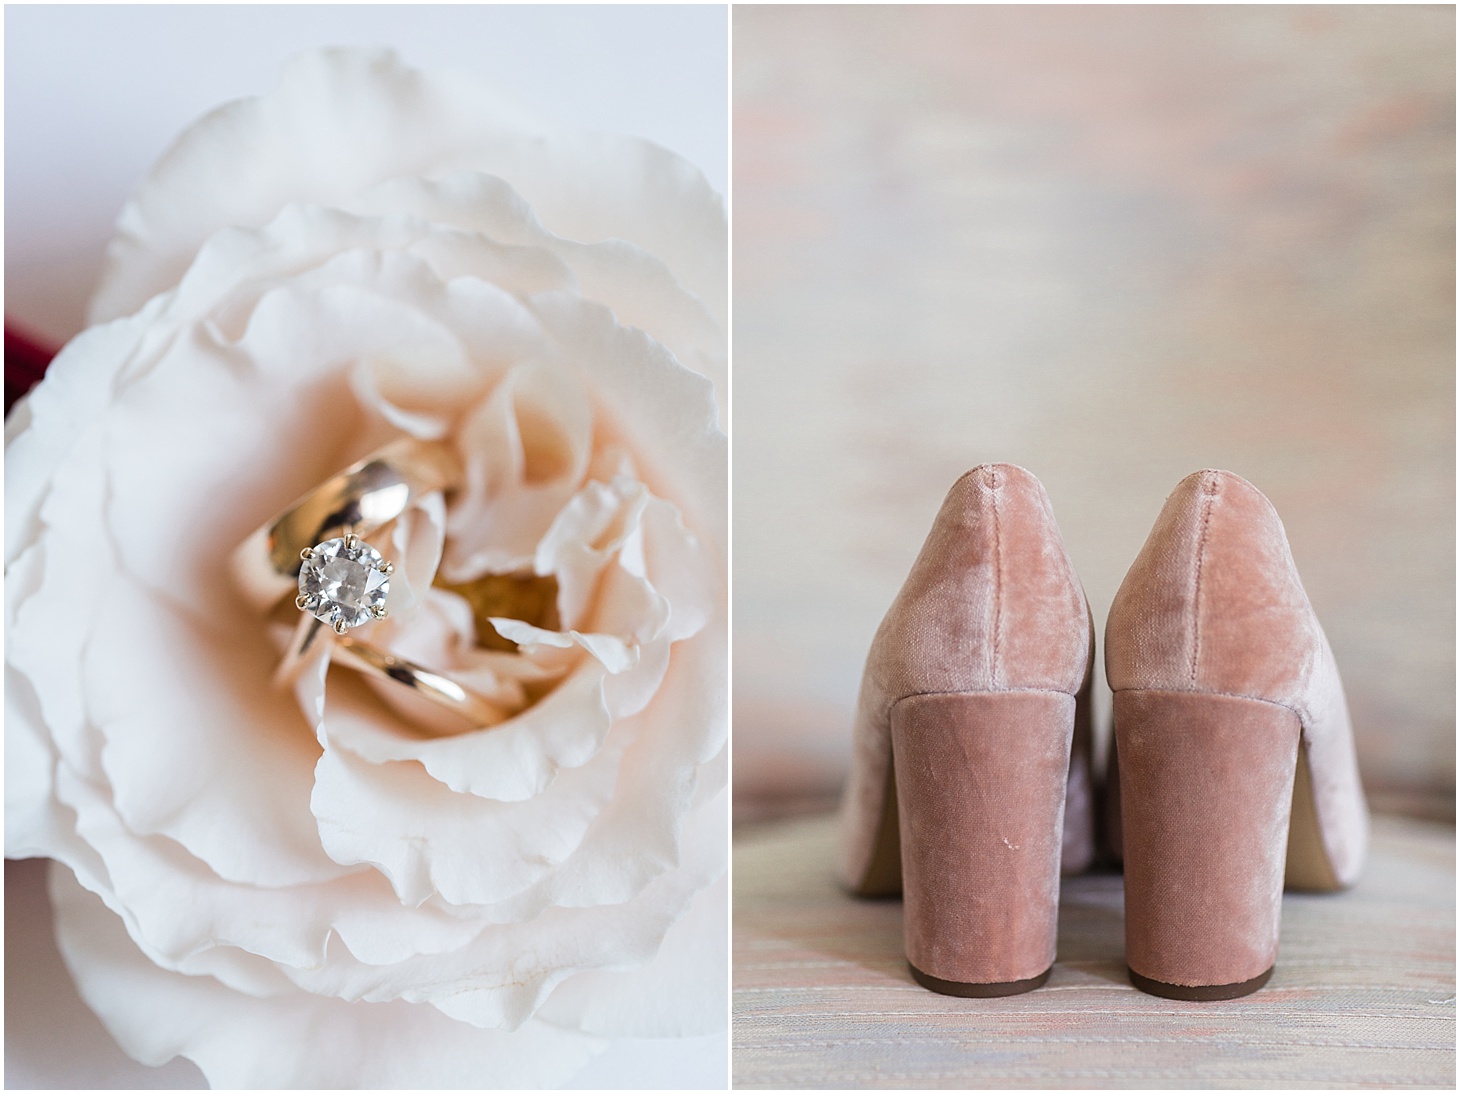 Blush Velvet Wedding Shoes and Engagement Ring Detail | Ceremony at the Holy Rosary Church | Burgundy and Blush DC Wedding at District Winery | Sarah Bradshaw Photography